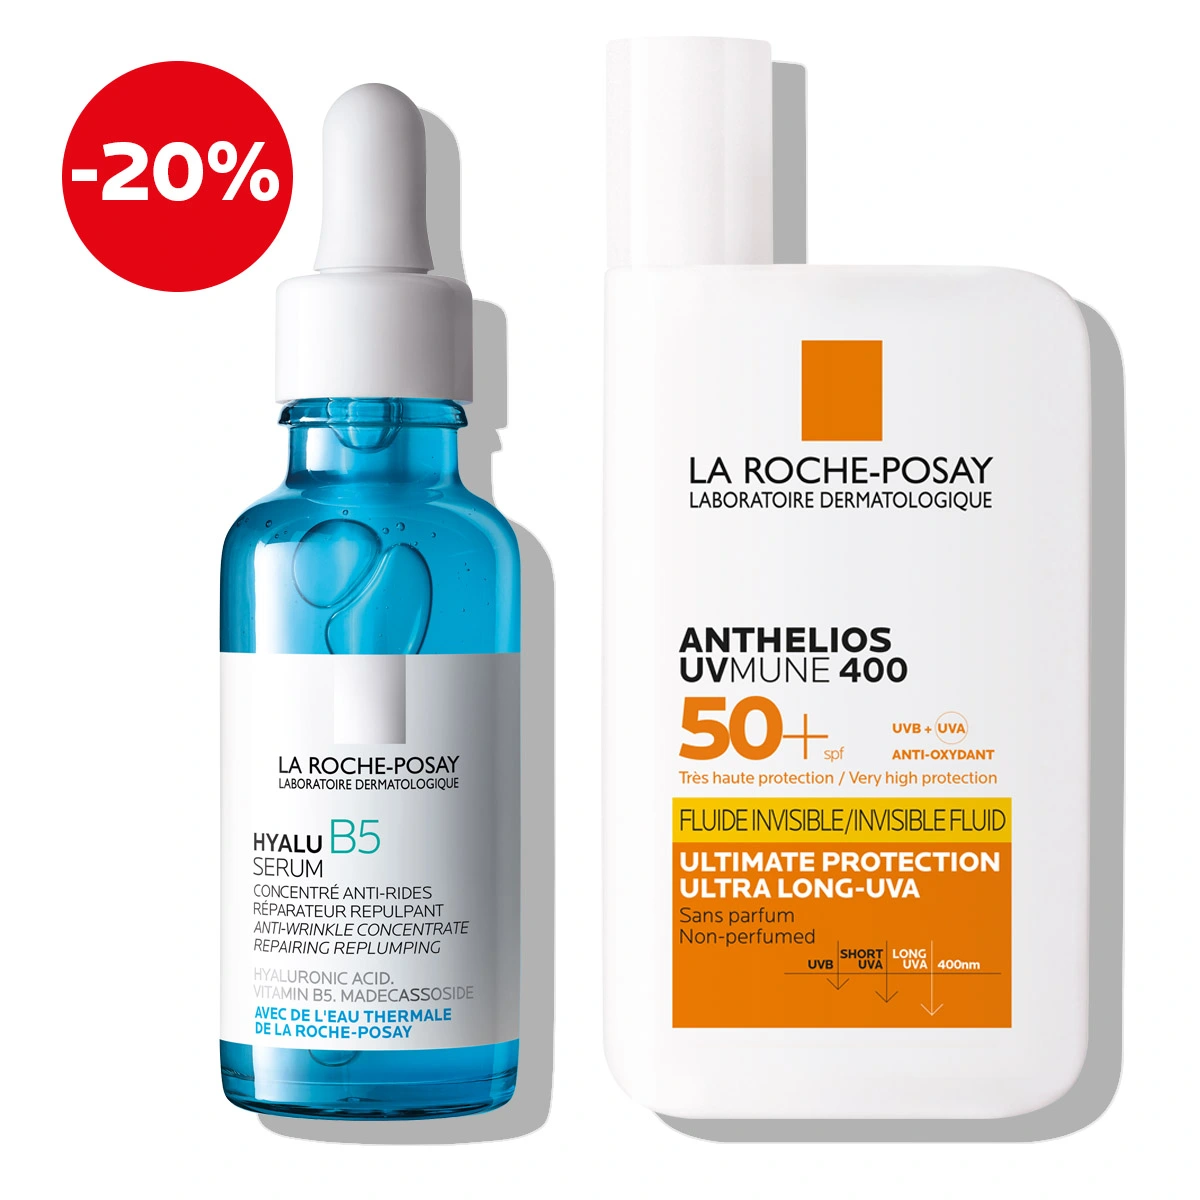 La Roche-Posay Anti-Age Protocol with hyaluronic acid for skin renewal and fullness (care and sun protection) (1)